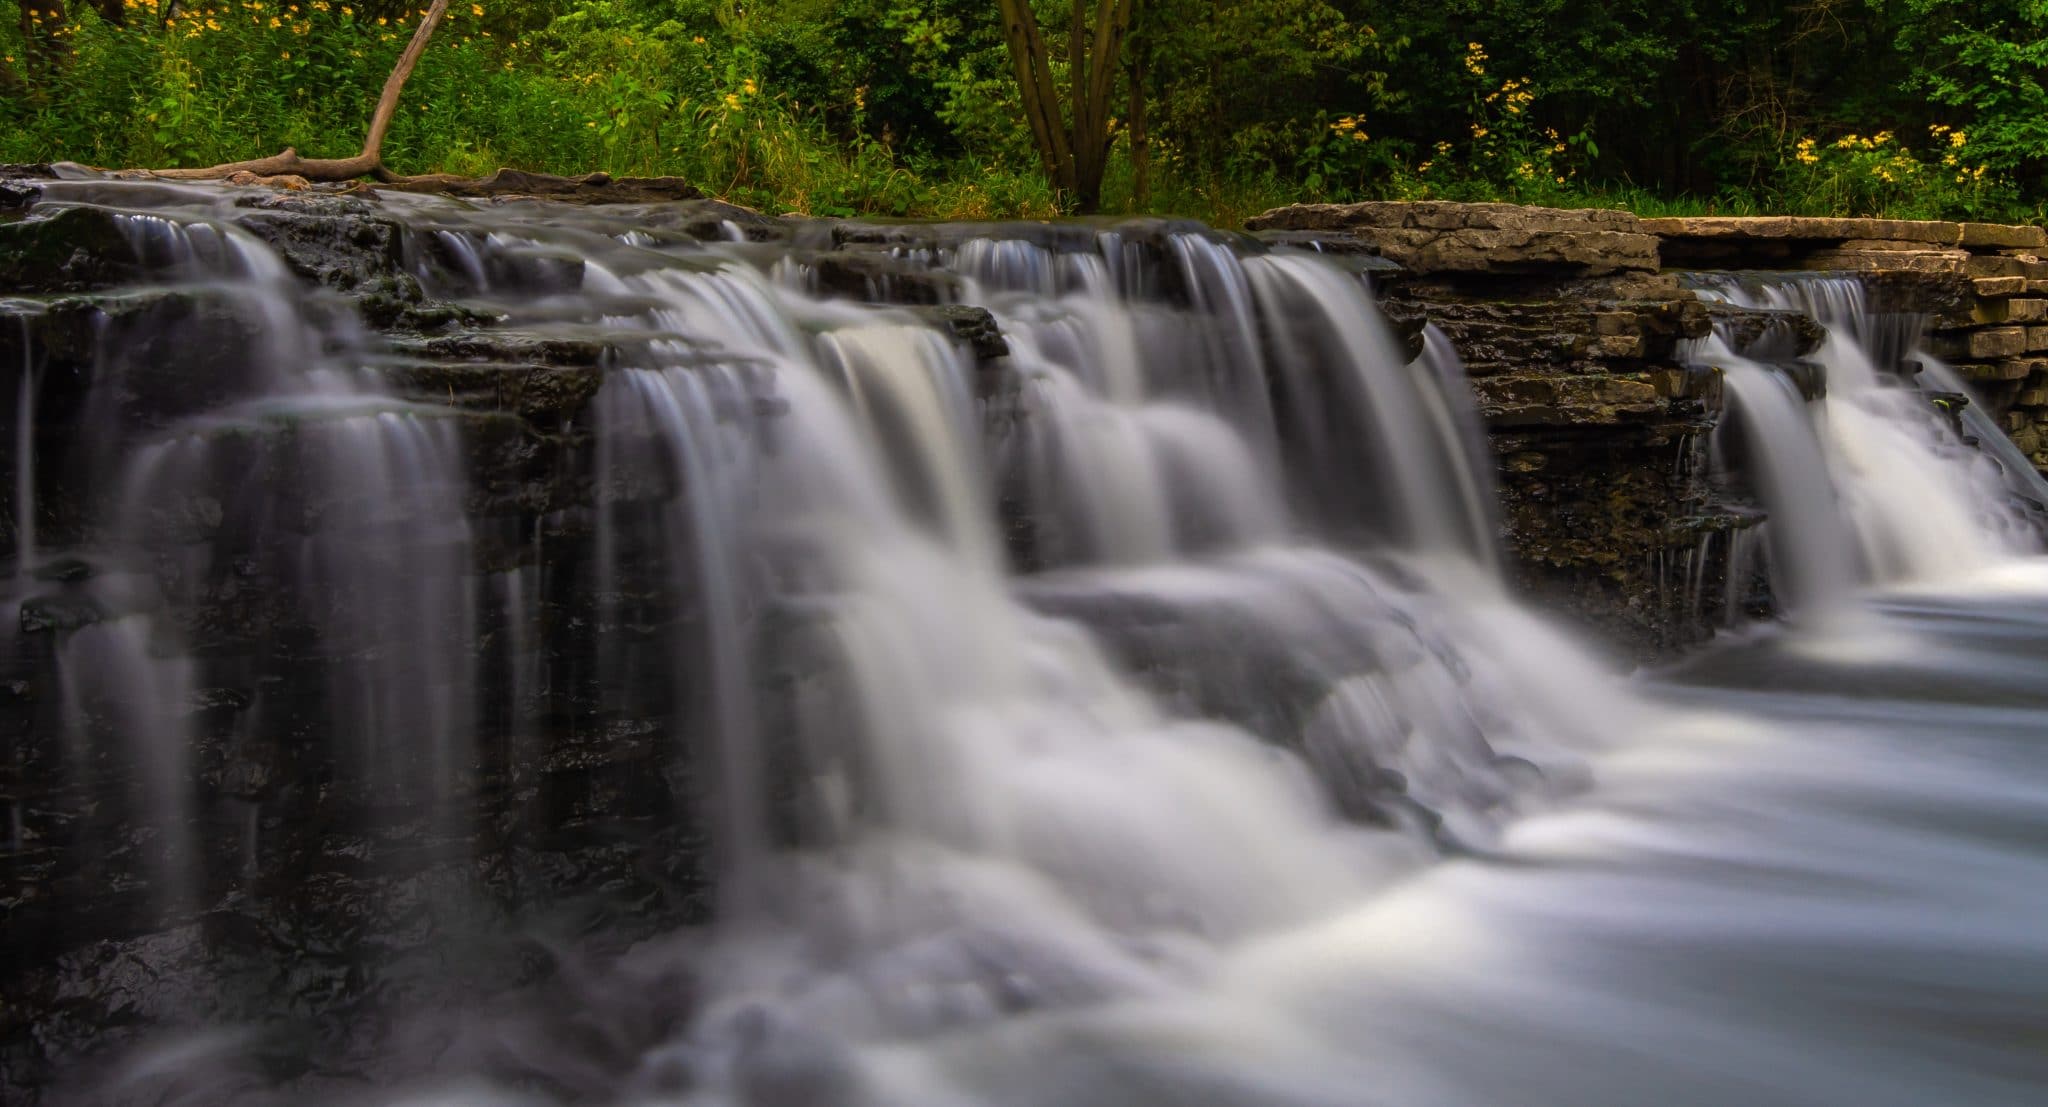 Image of a waterfall near Chicago in Waterfall Glen Forest Preserve